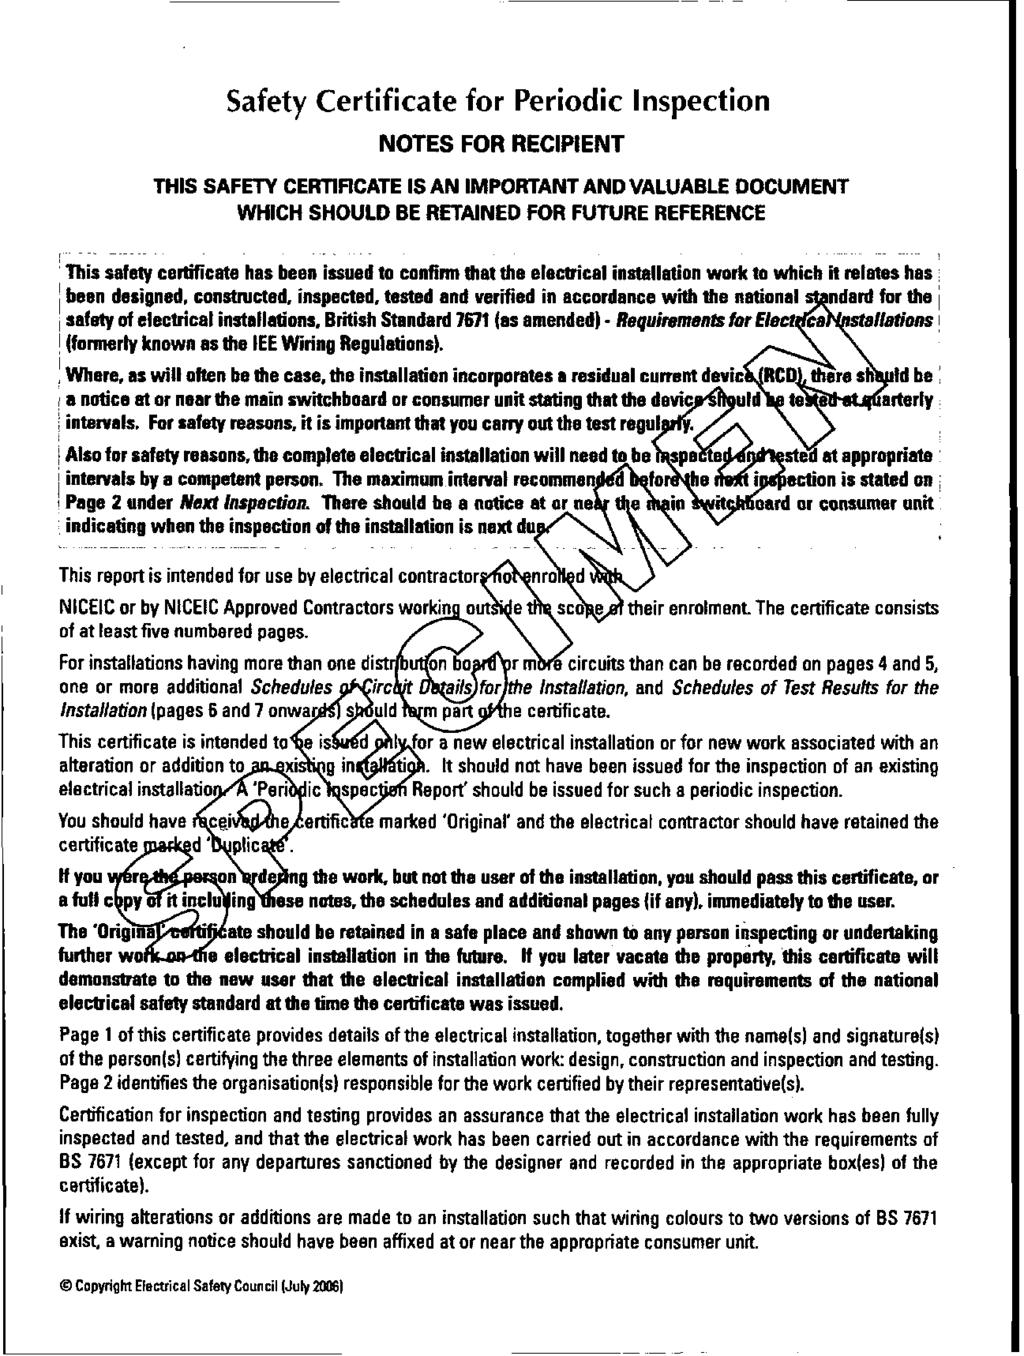 r Safety Certificate for Periodic Inspection NOTES FOR RECIPIENT THIS SAFETY CERTIFICATE IS AN IMPORTANT AND VALUABLE DOCUMENT WHICH SHOULD BE RETAINED FOR FUTURE REFERENCE ' This safety certificate